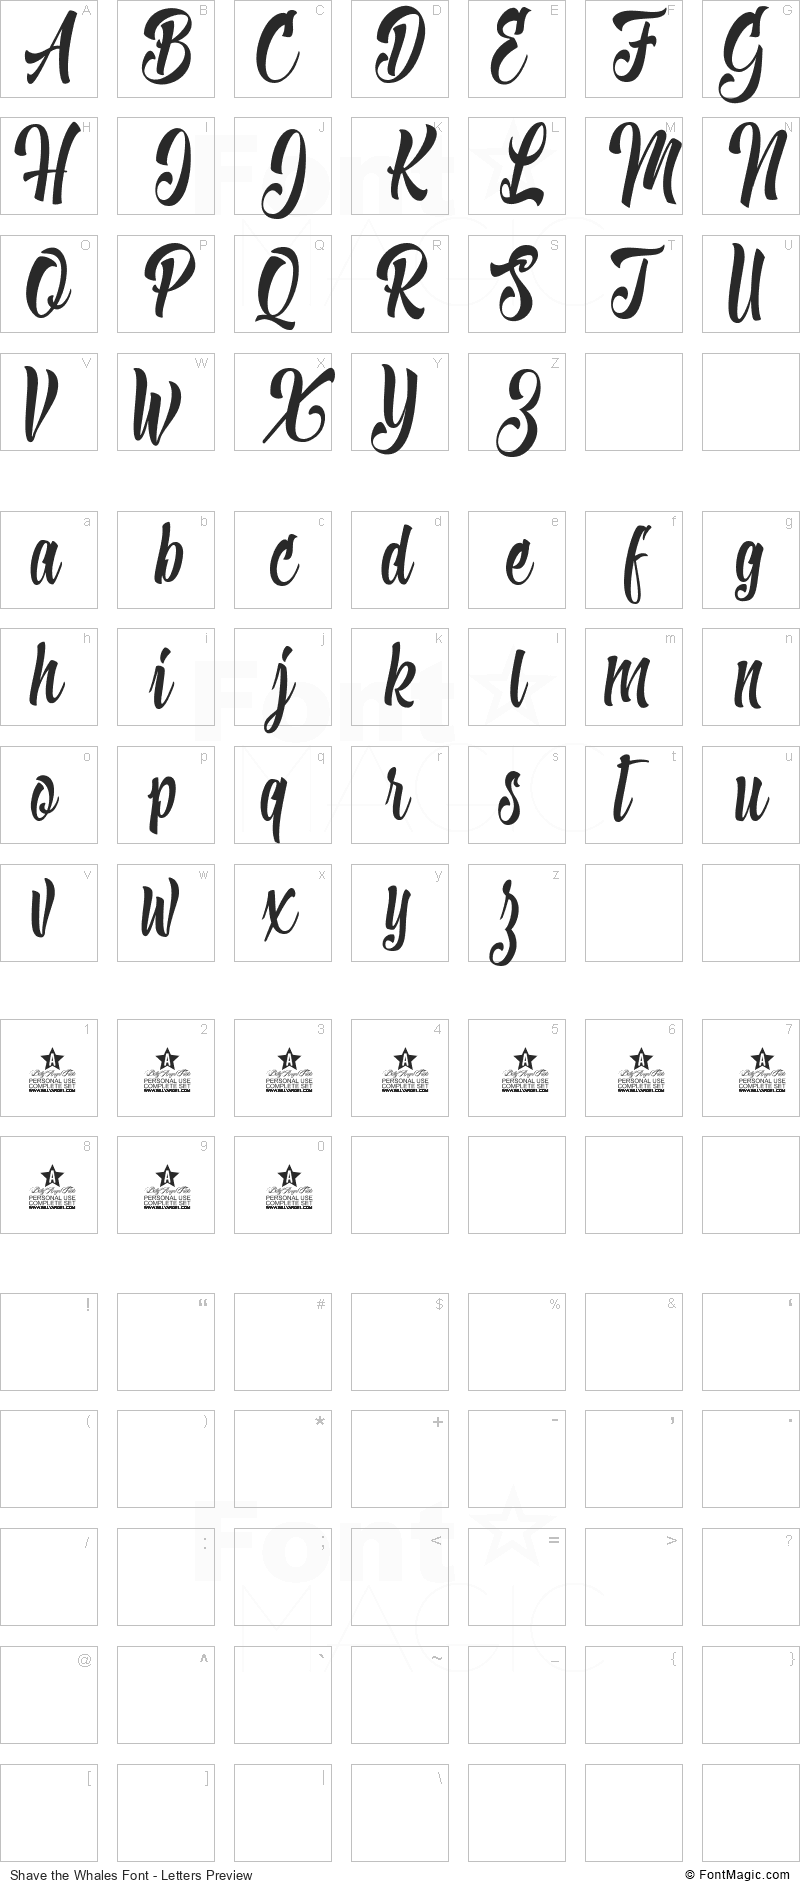 Shave the Whales Font - All Latters Preview Chart